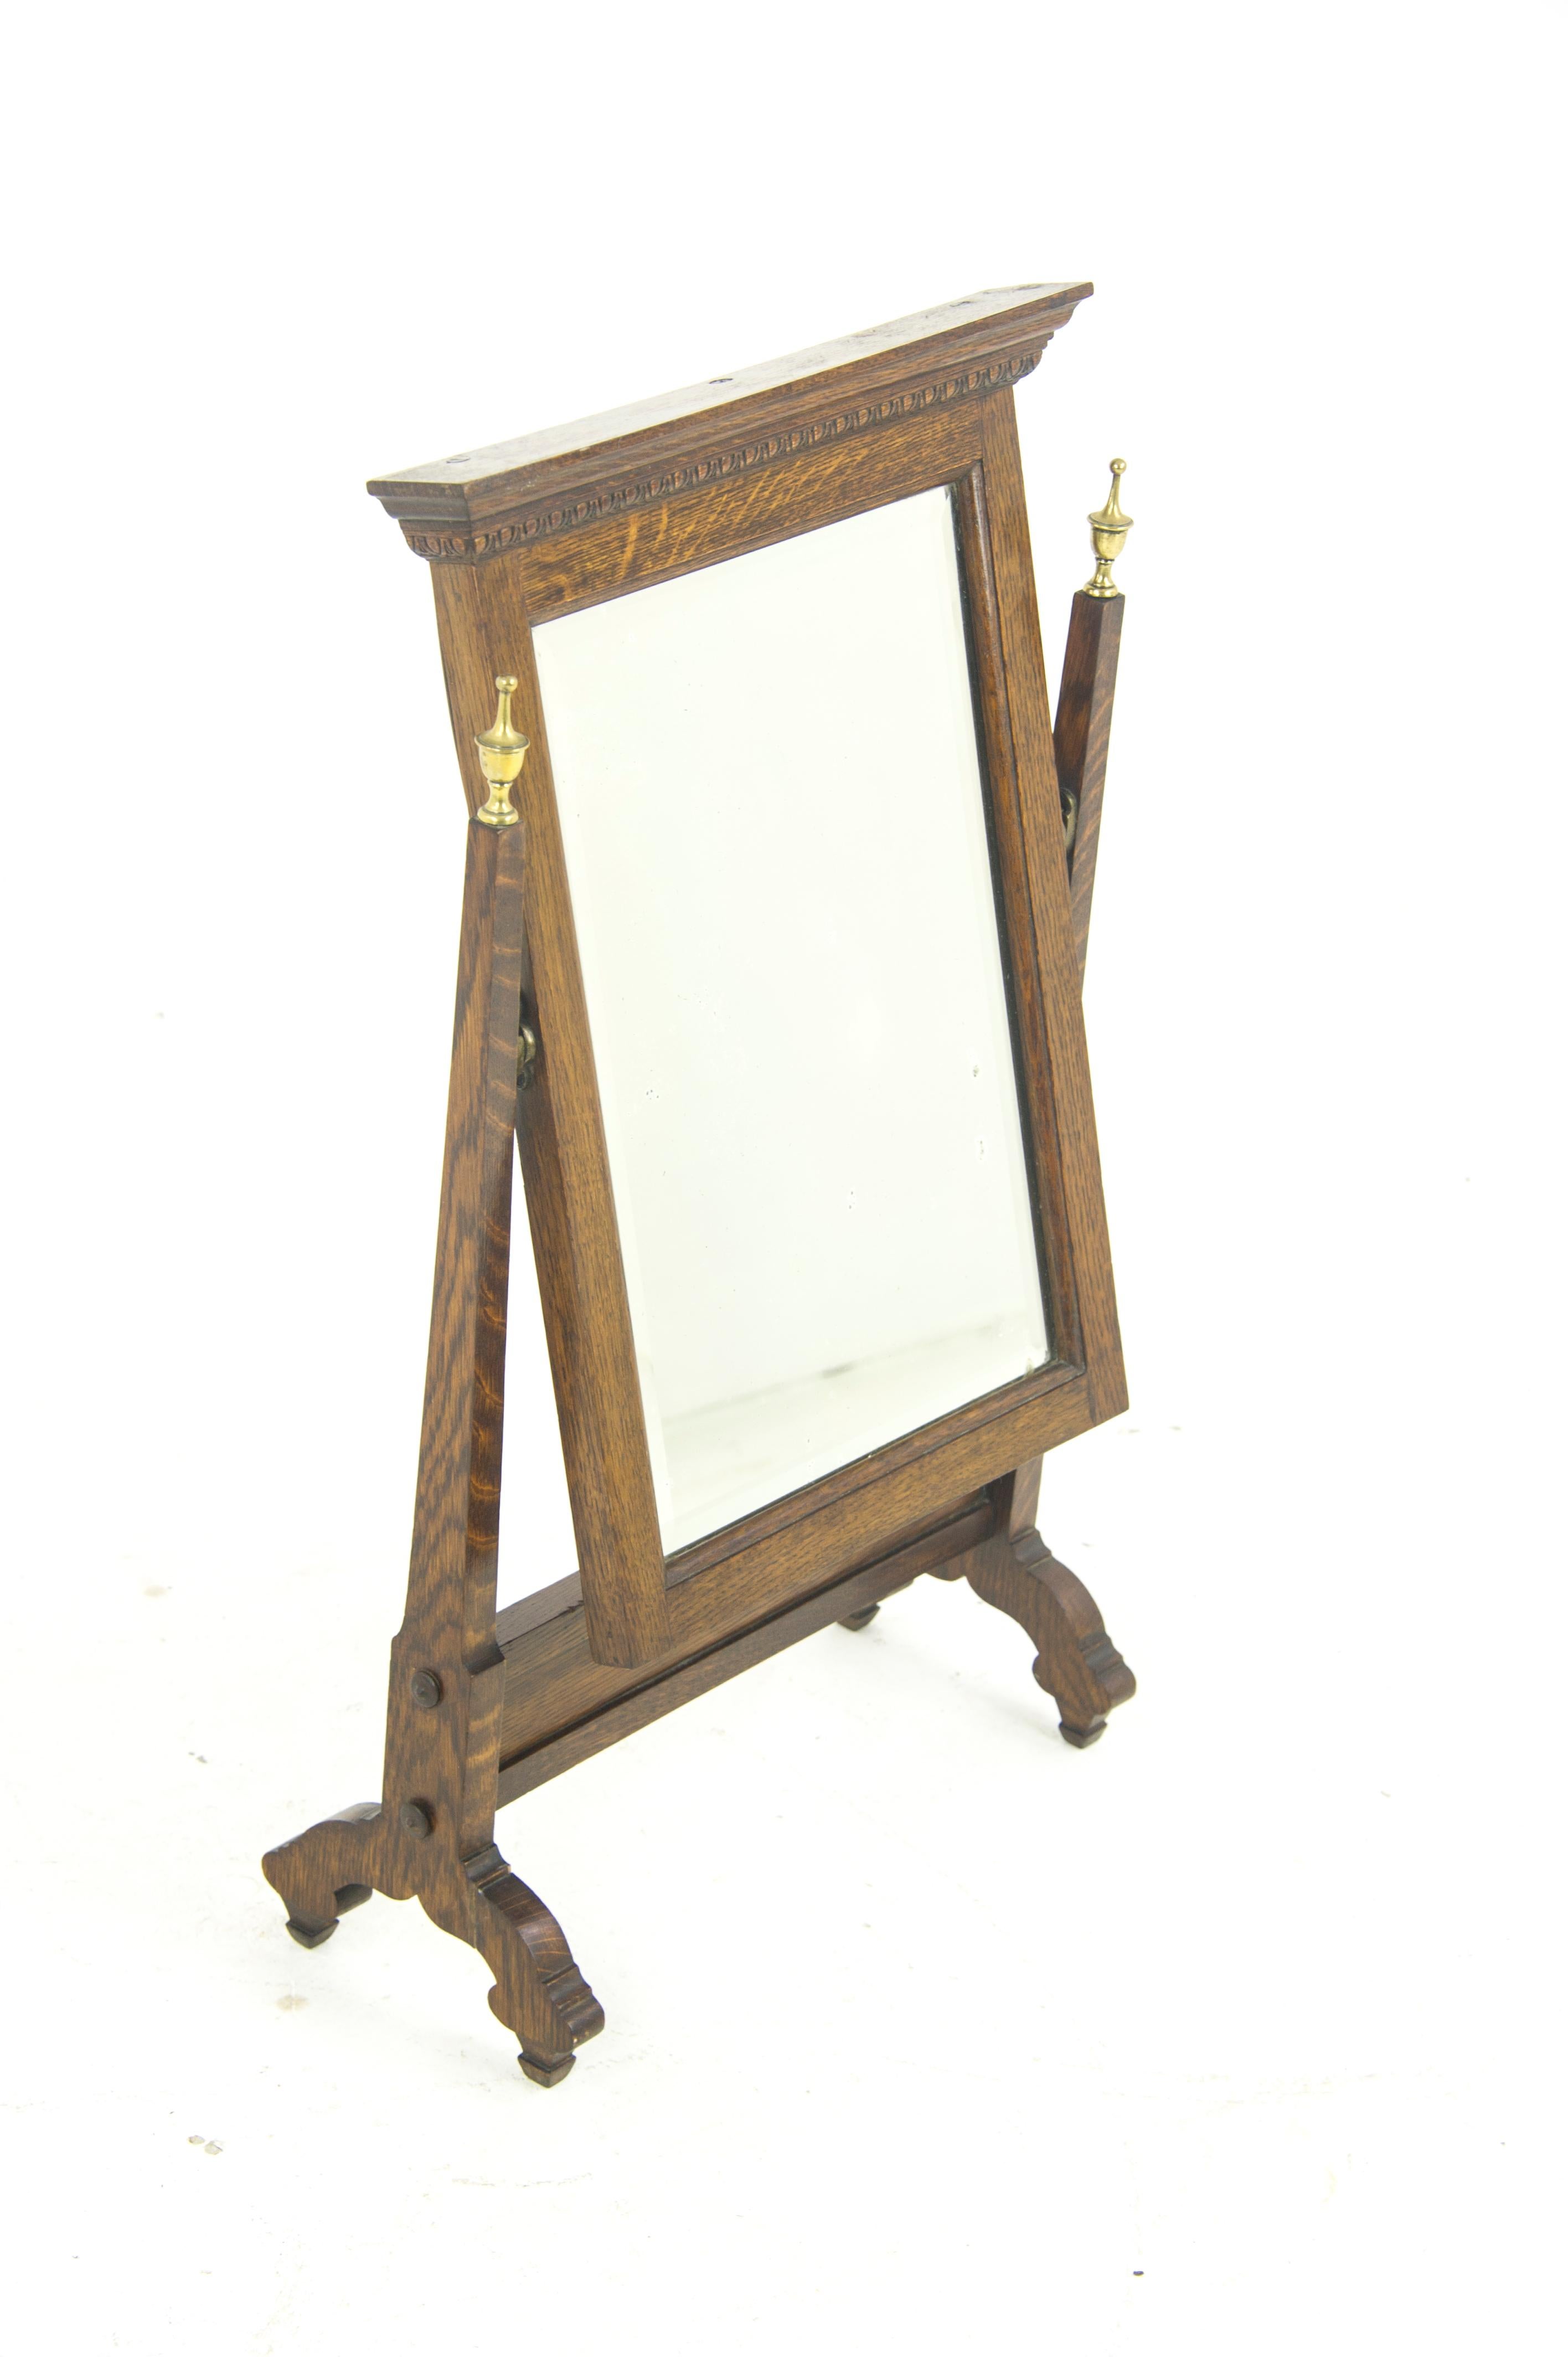 Antique shaving mirror, dressing mirror, vanity mirror, Scotland, 1900, H26

Scotland 1900
Solid Tiger Oak Construction0
Original Finish
Crisp Carved Cornice Above
Rectangular Beveled Mirror
Flanked by two supports with brass finials on top
Shaped